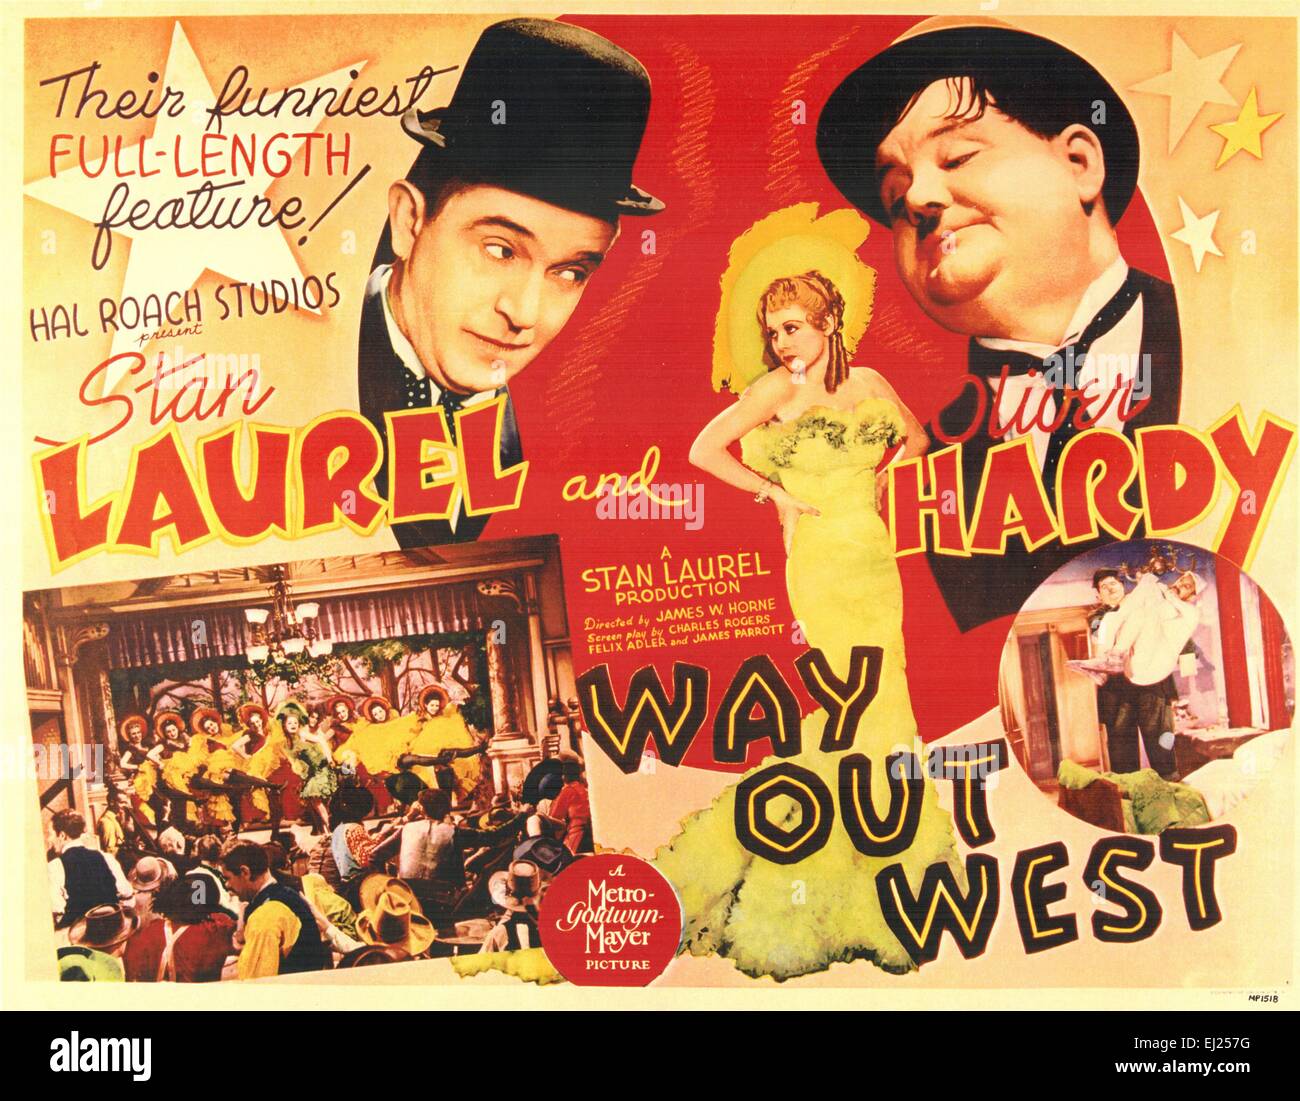 MOVIE FILM WAY OUT WEST LAUREL HARDY CLASSIC WESTERN COMEDY POSTER ART LV10205 